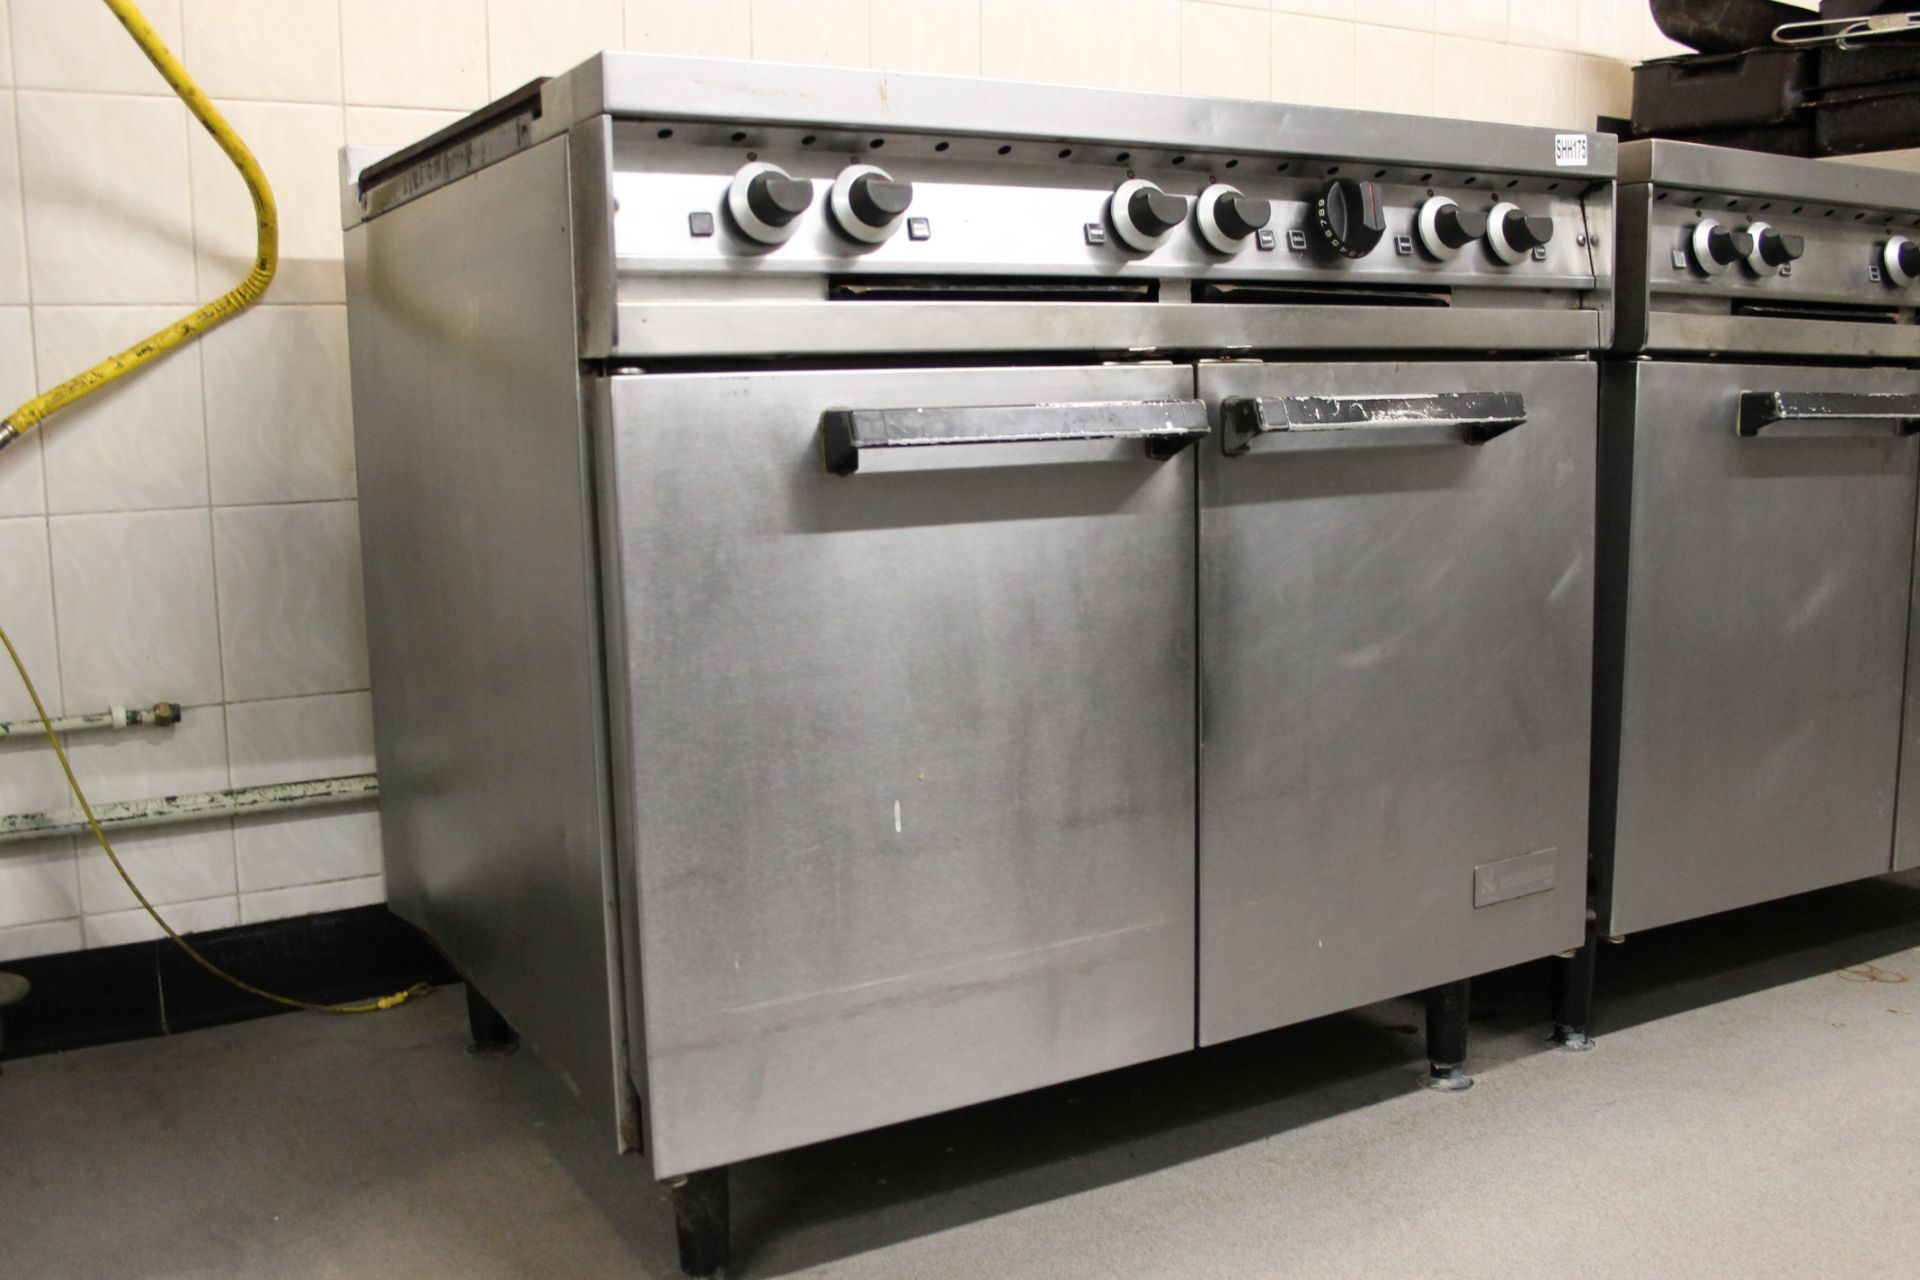 Falcon Dominator Six Burner Gas Cooker & Double Oven - Image 2 of 4